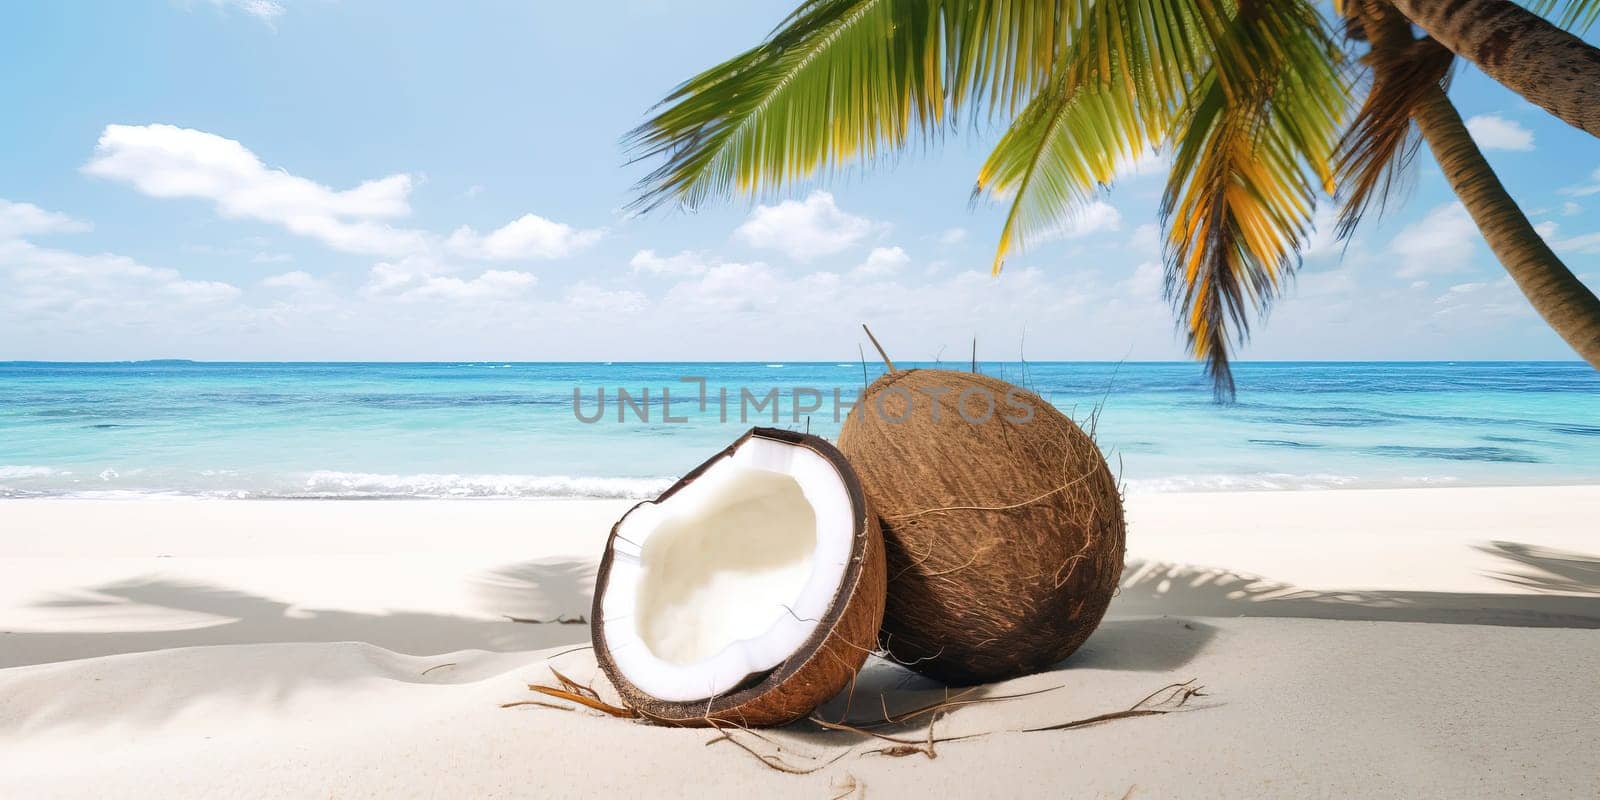 Coconut lying on the beach under a palm tree with the ocean in the background